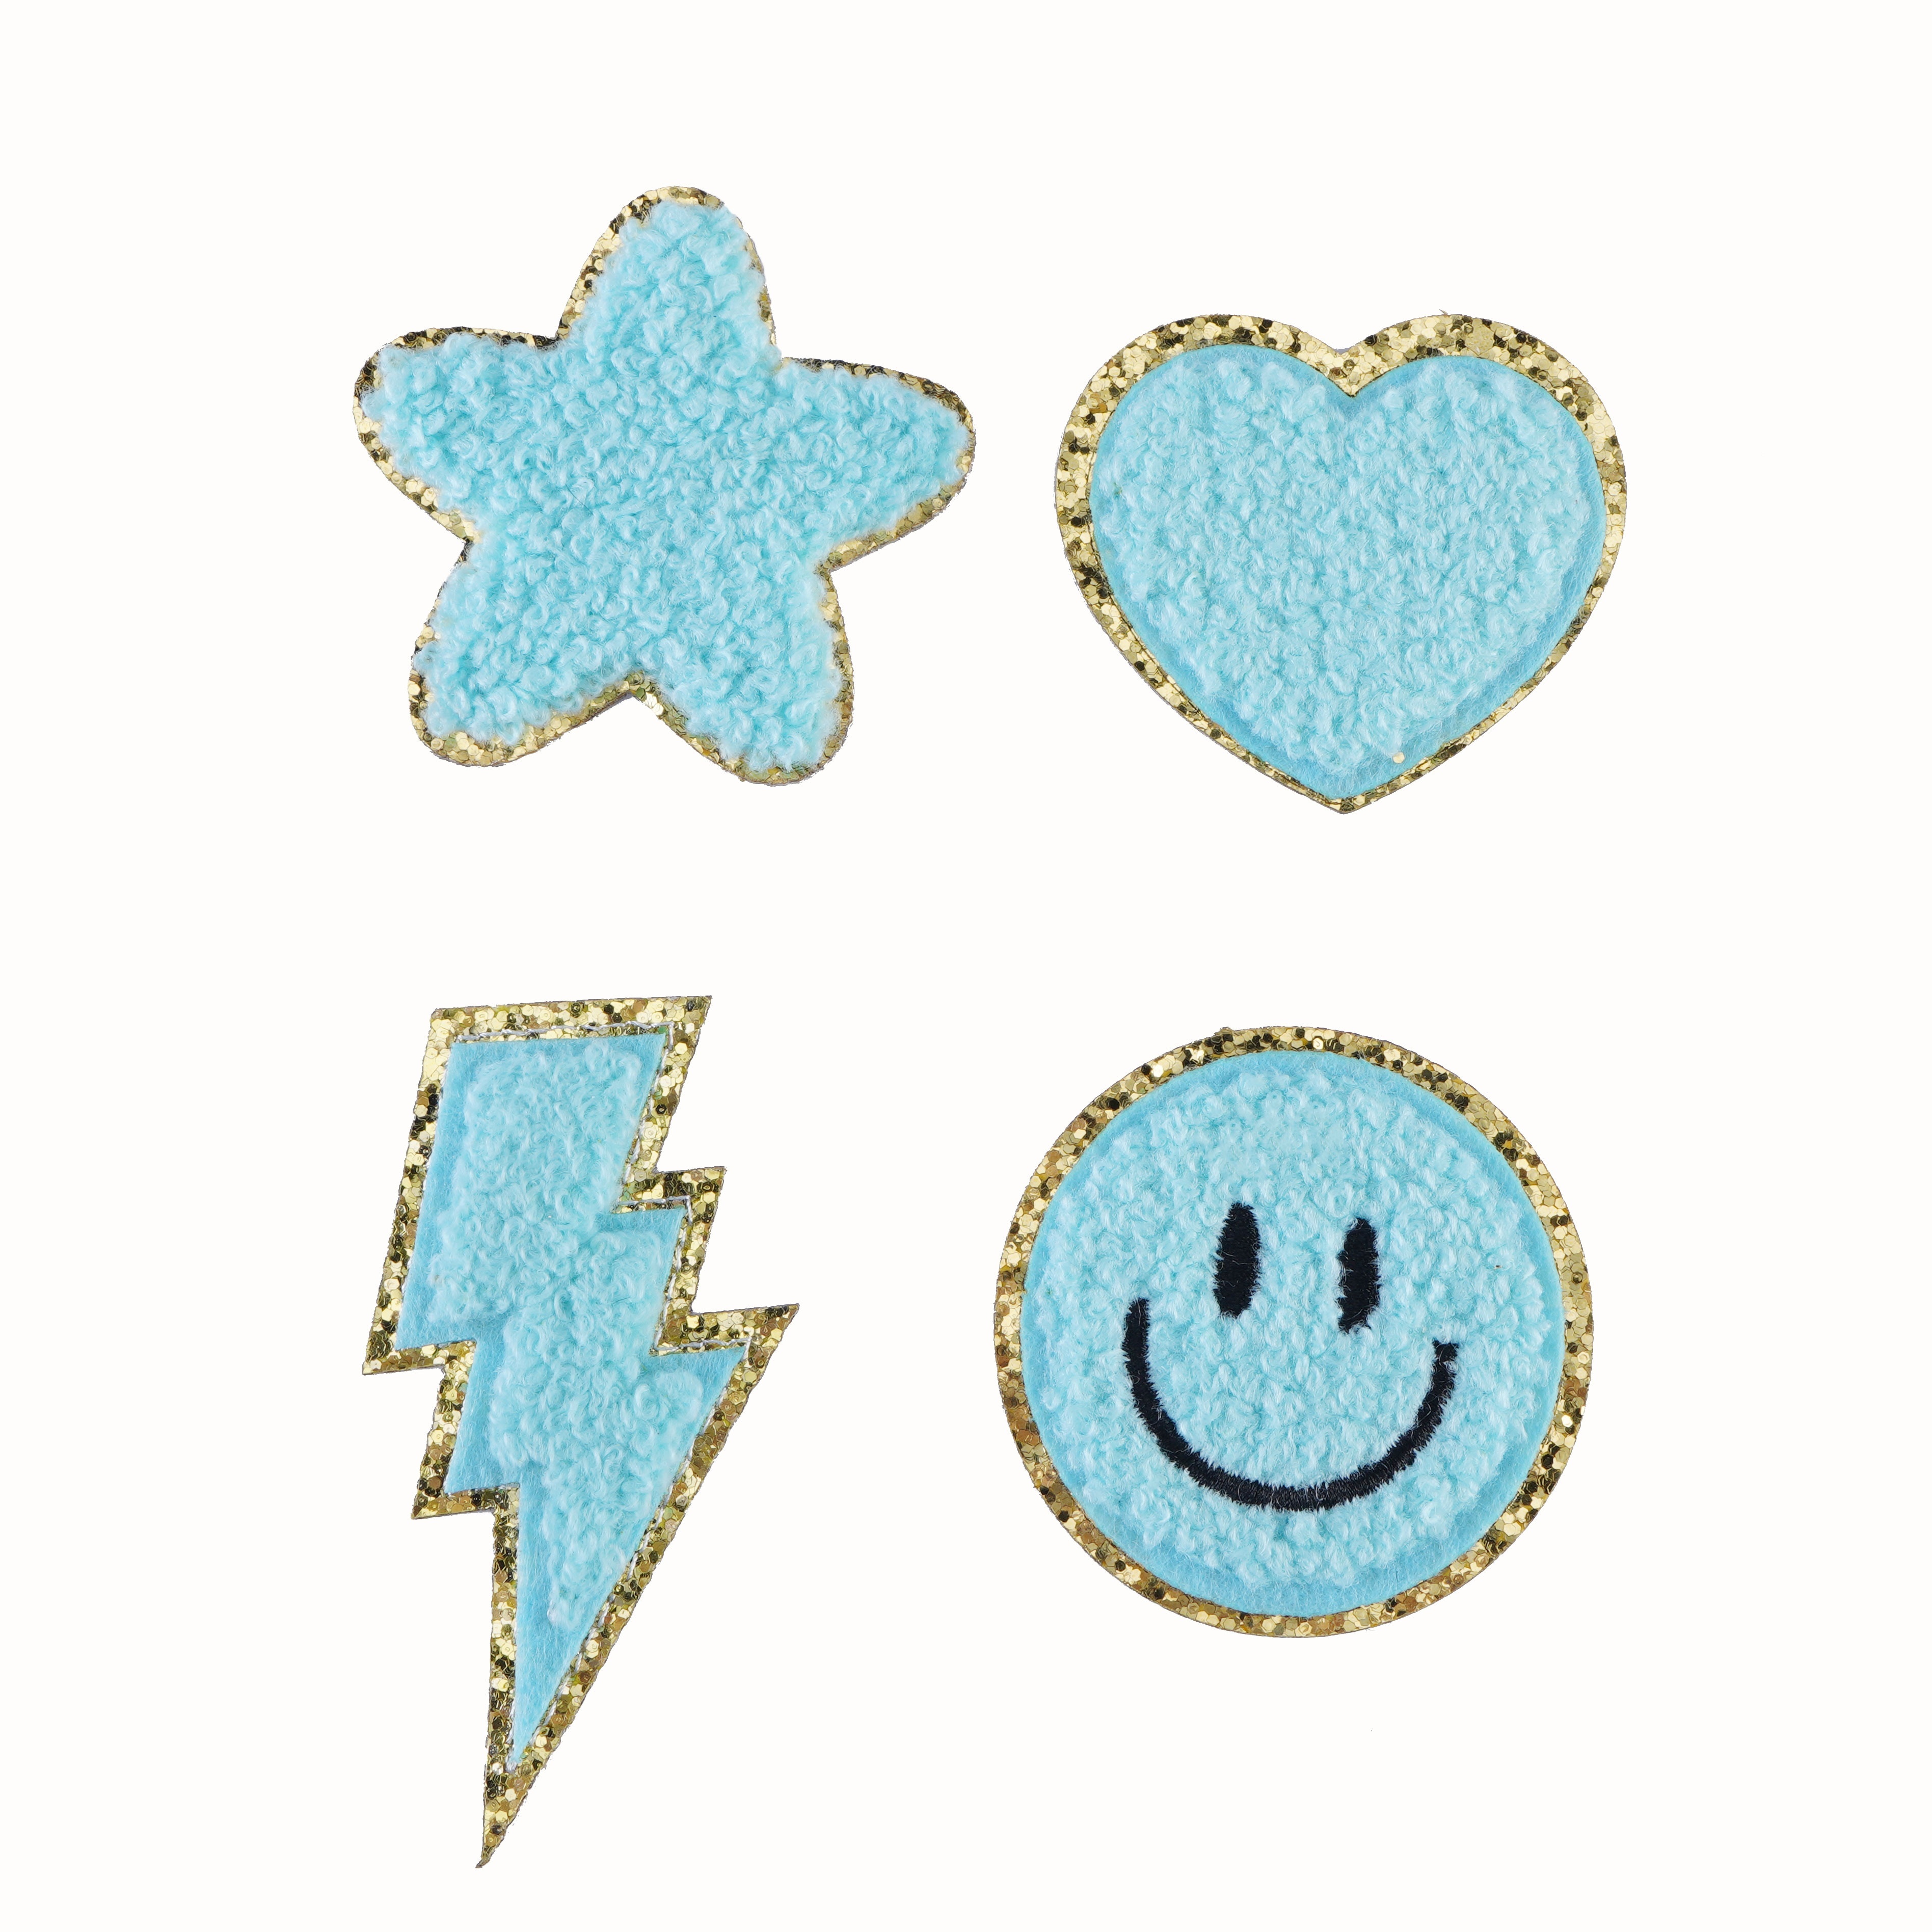 Cry Baby // Smiley Face DIY Embroidered Patch Applique Mental